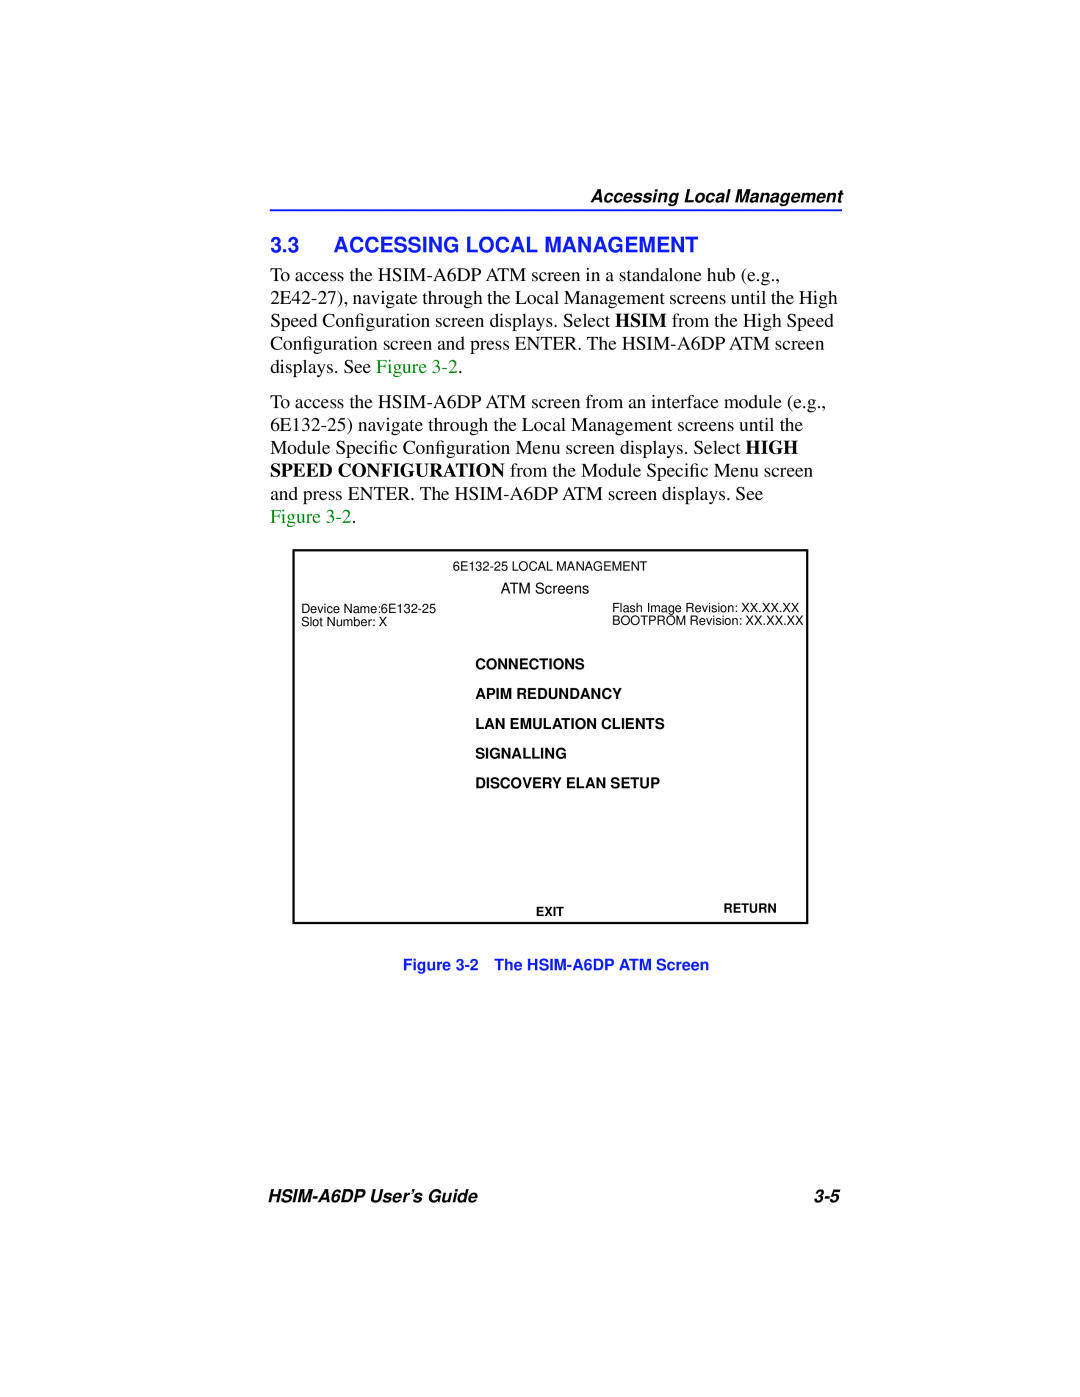 Cabletron Systems HSIM-A6DP manual Accessing Local Management 